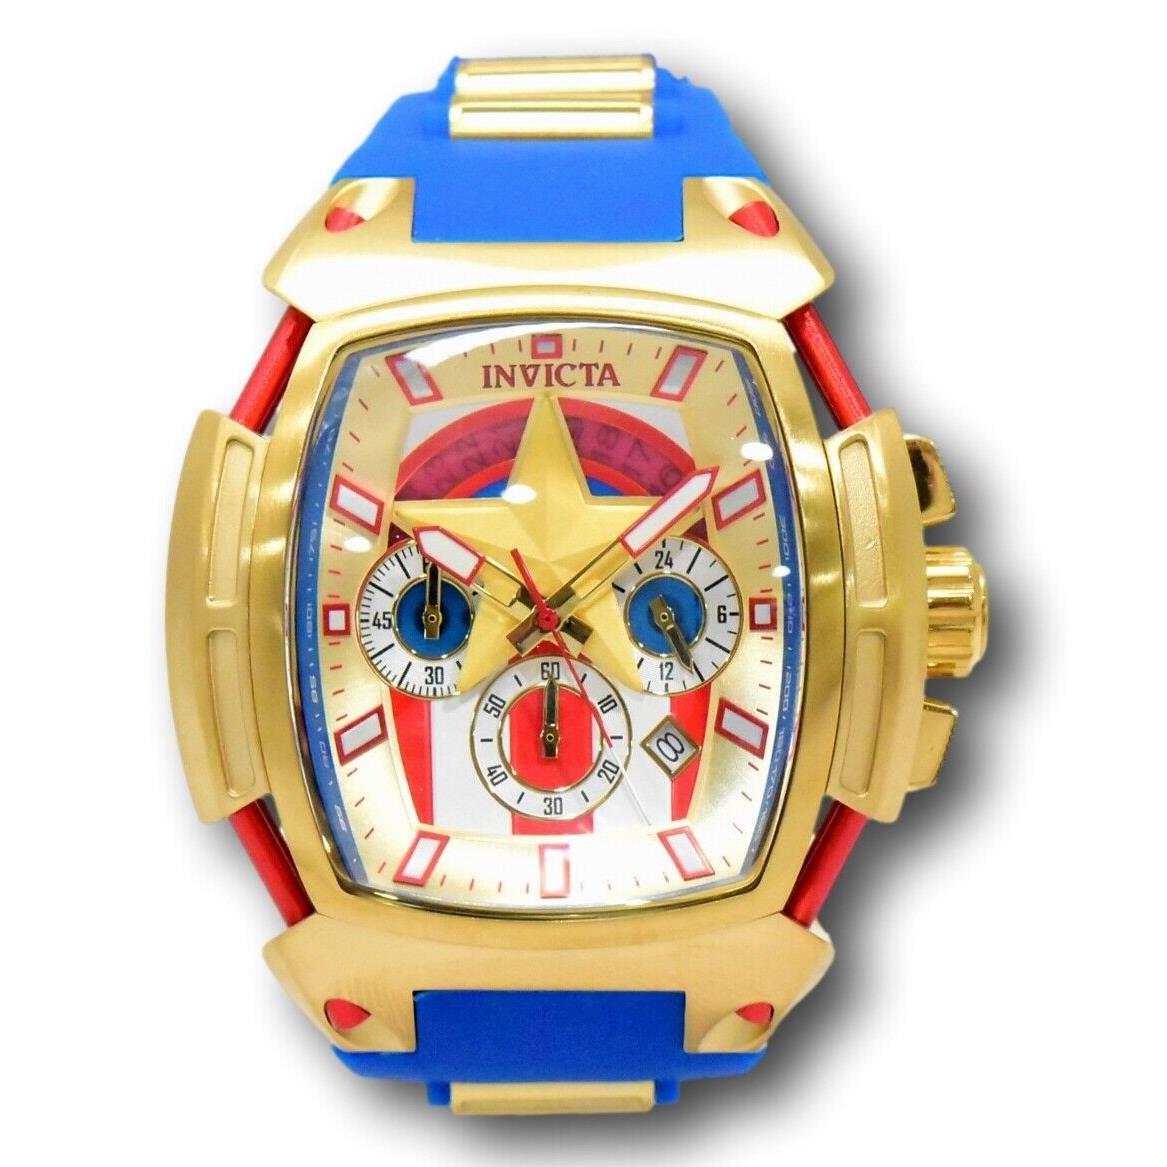 Invicta Diablo Marvel Captain America Men`s 53mm Limited Ed Chrono Watch 38380 - Dial: Blue, Gold, Multicolor, Red, White, Band: Blue, Bezel: Gold, Yellow